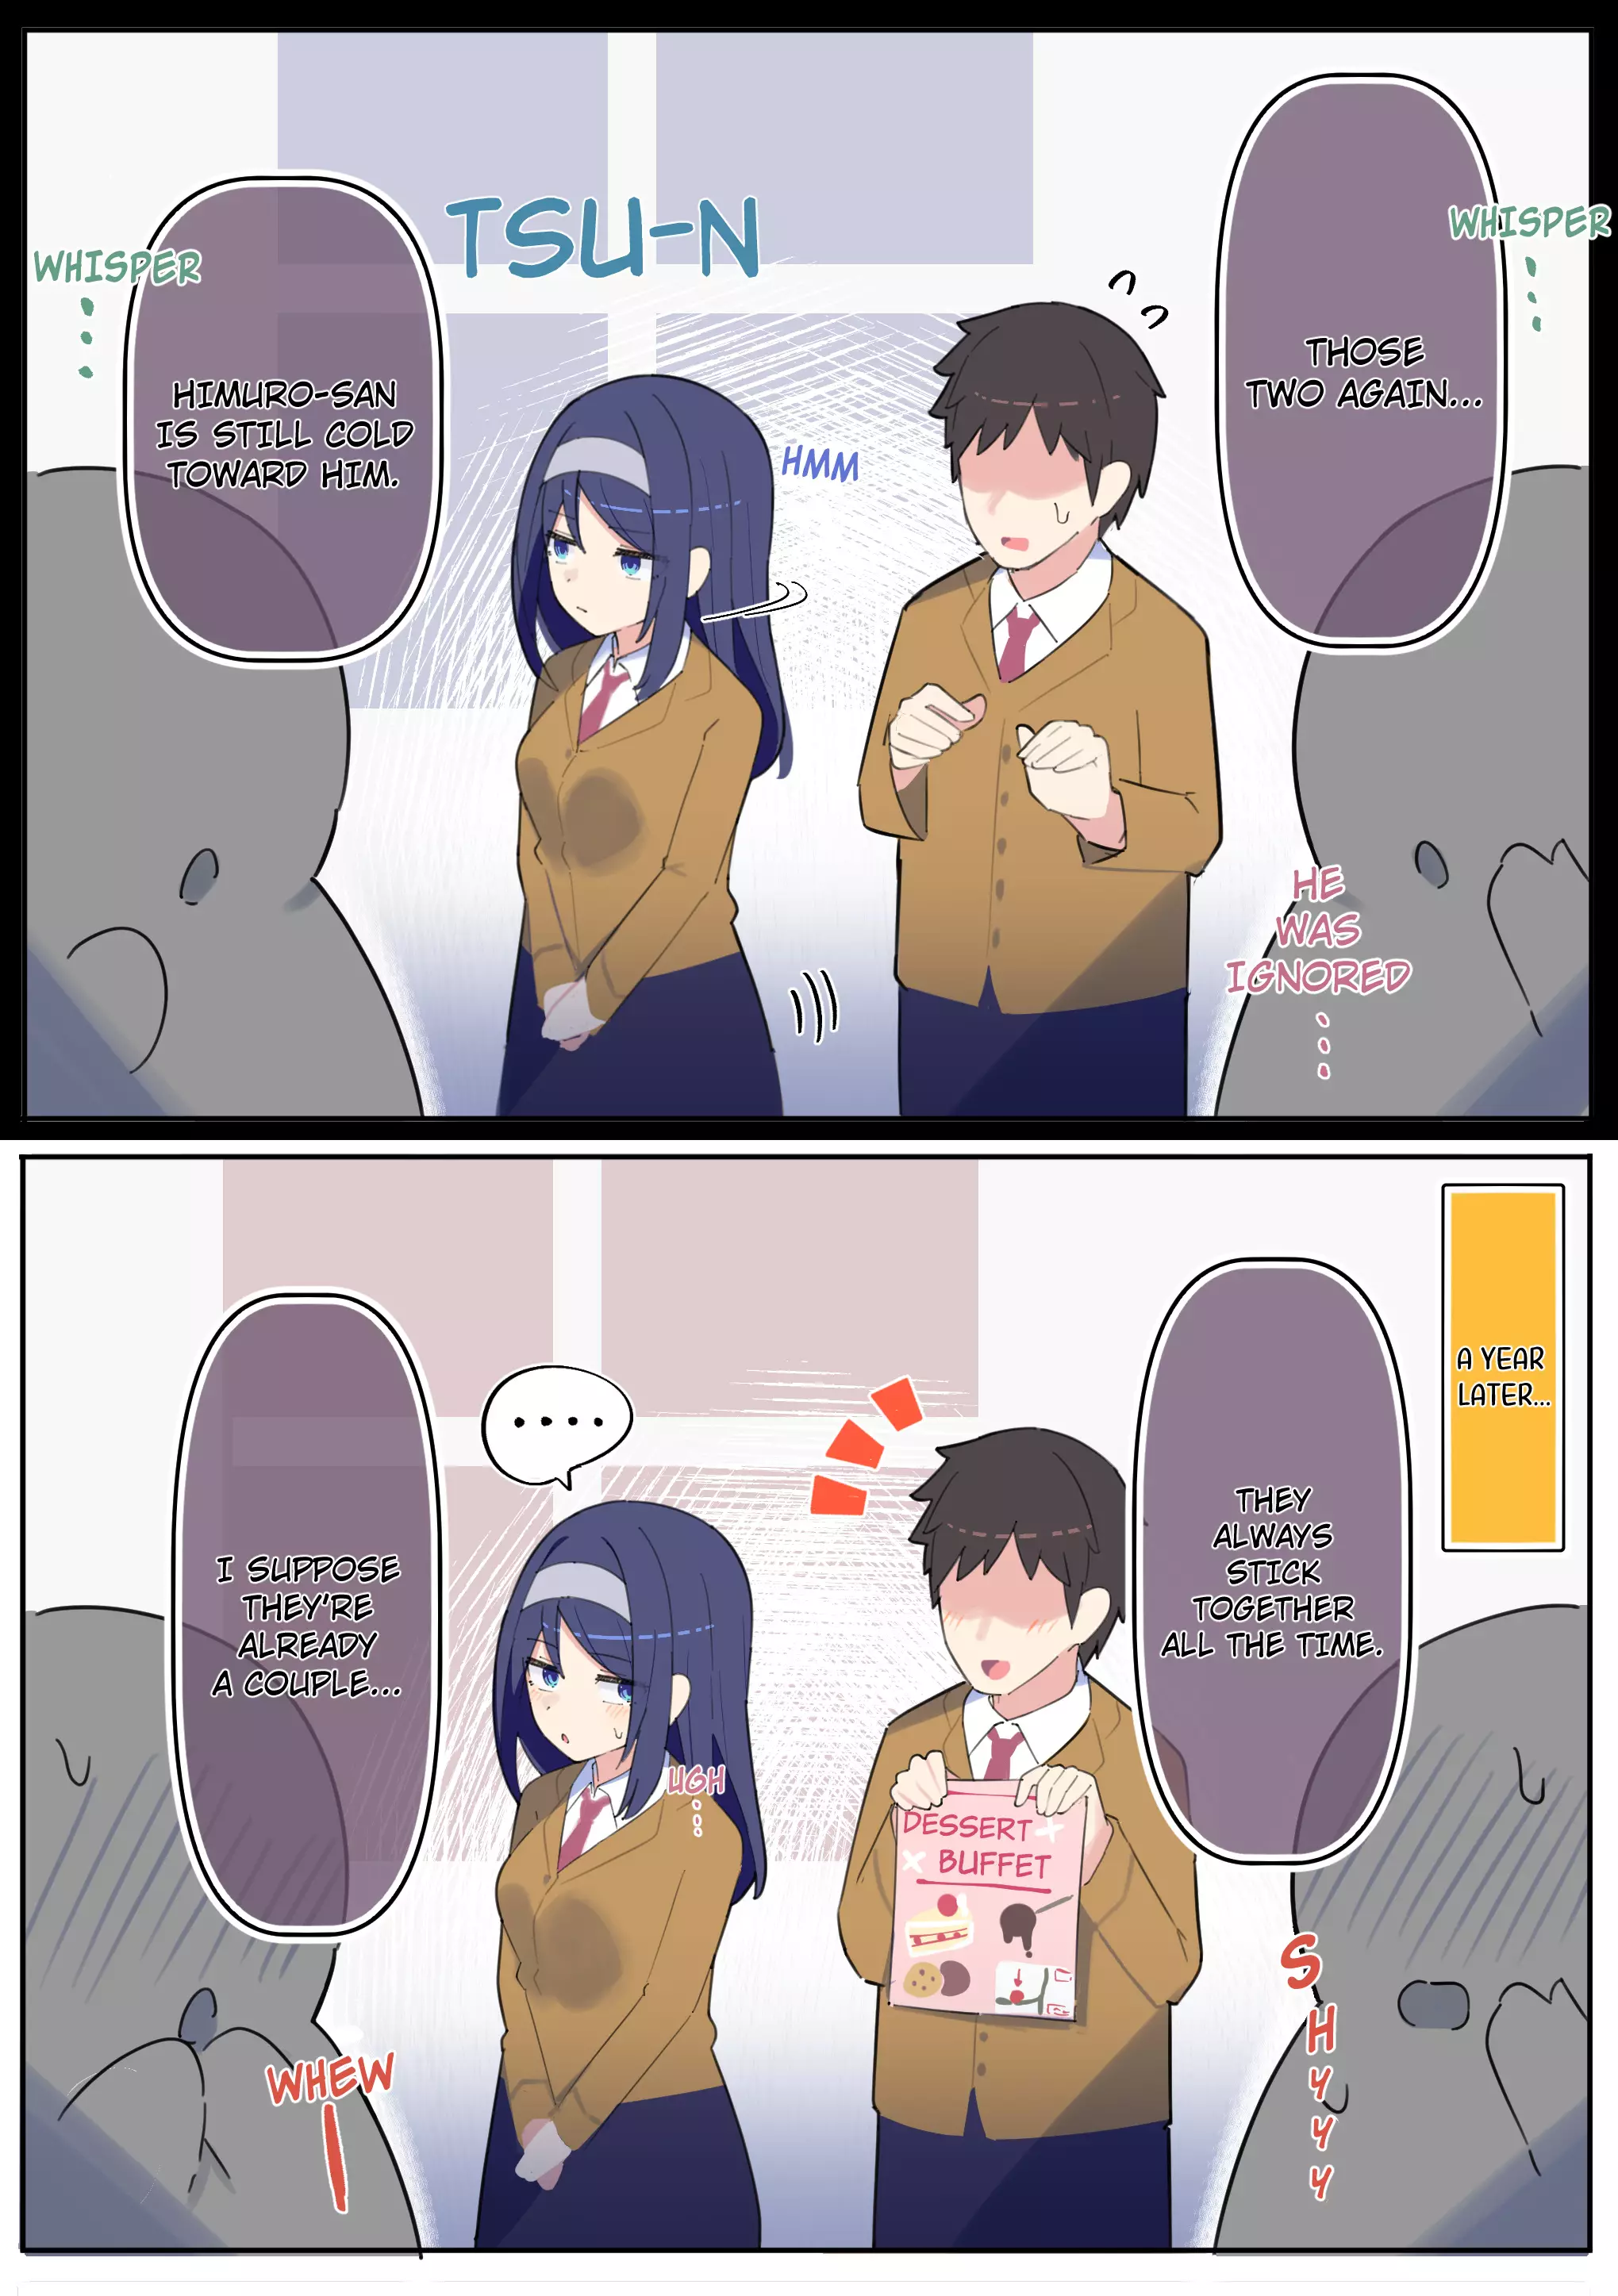 The Cool Classmate ◯◯ Years Later... - 94 page 1-0264b85c